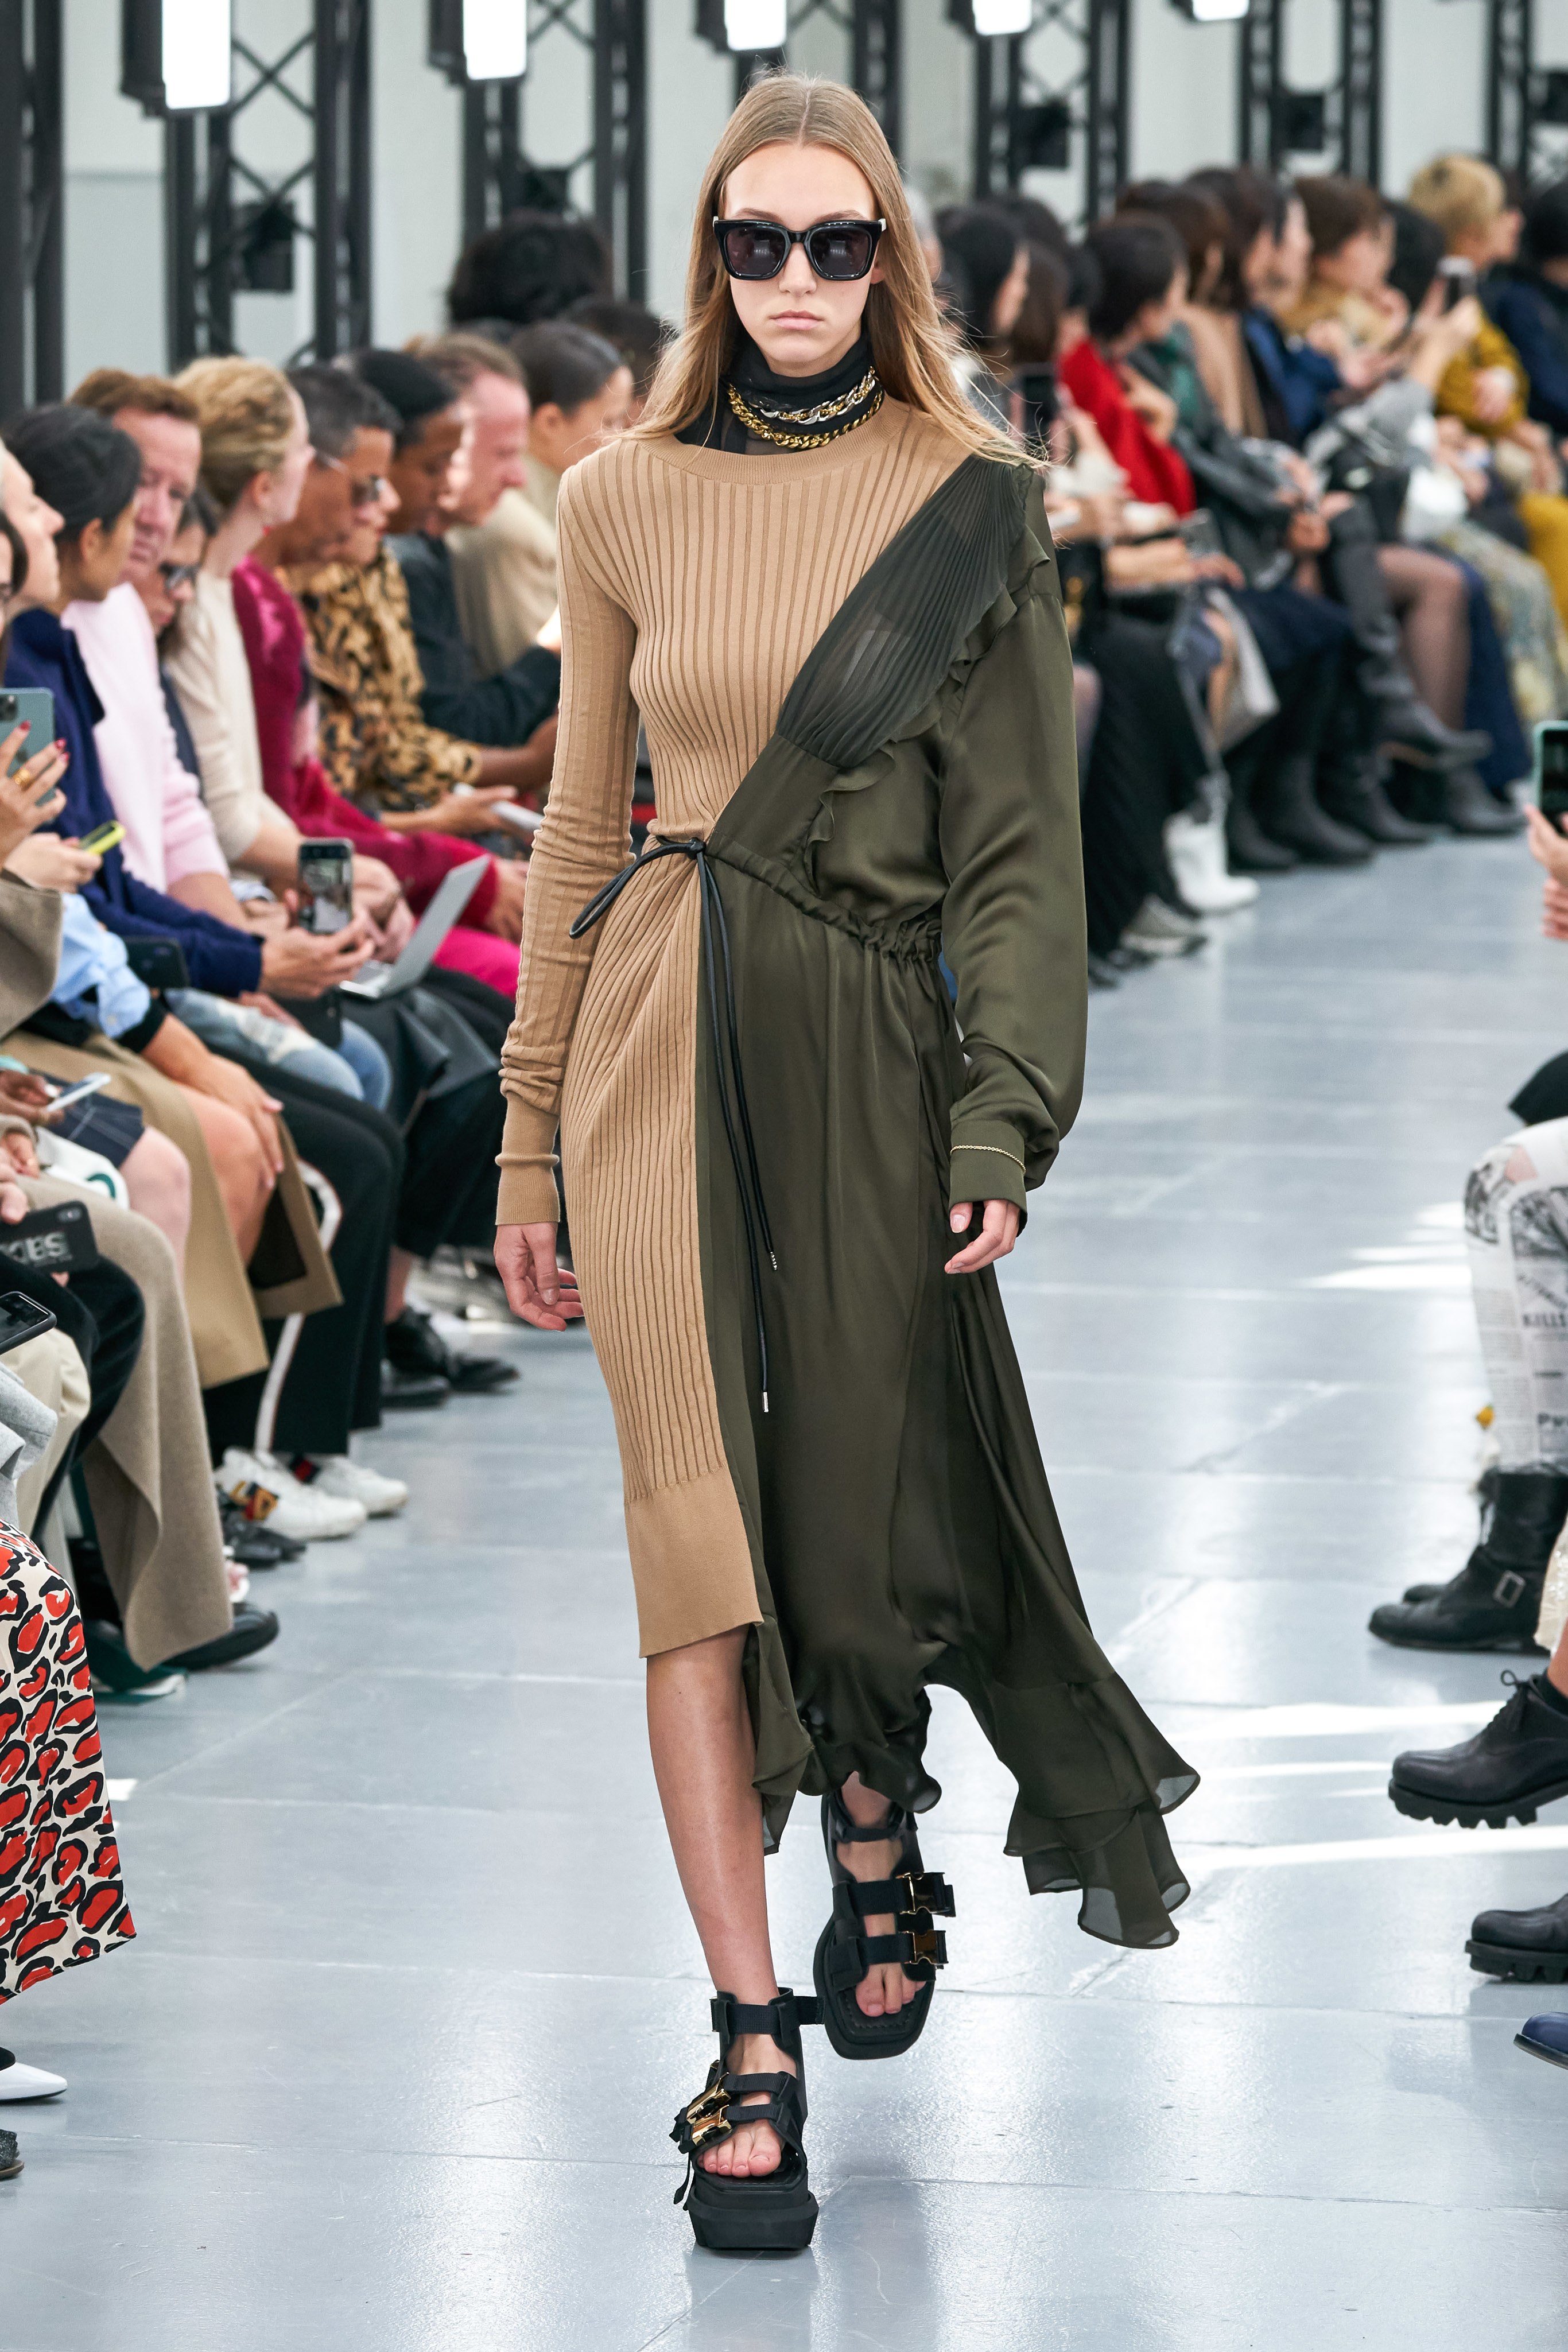 Sacai Spring Summer 2020 SS2020 trends runway coverage Ready To Wear Vogue double trouble